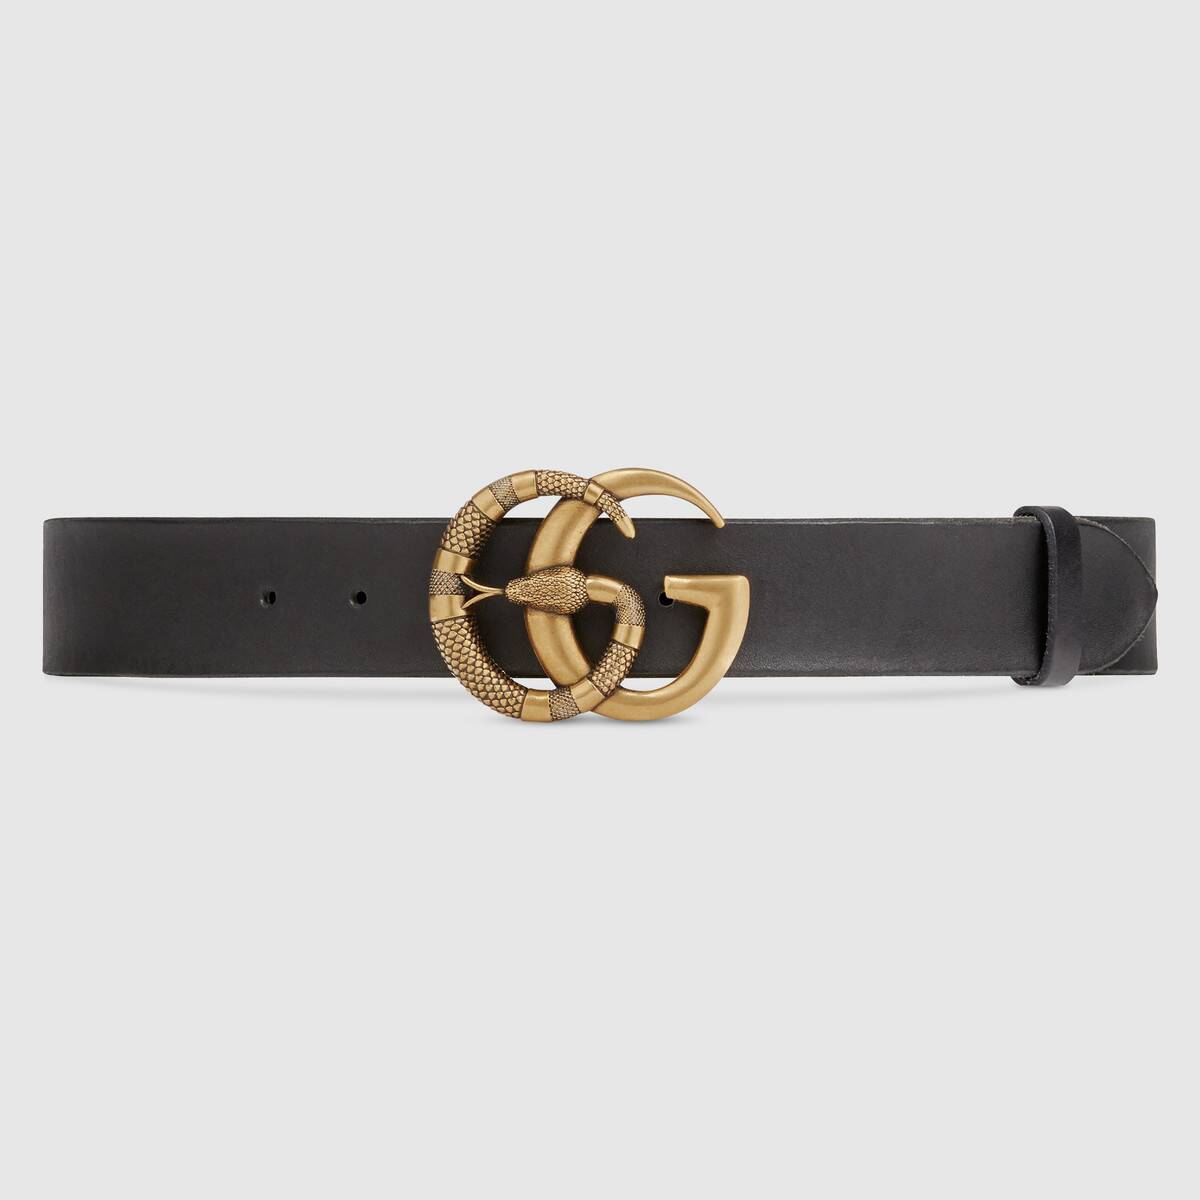 how to find your GUCCI BELT size for the PERFECT FIT